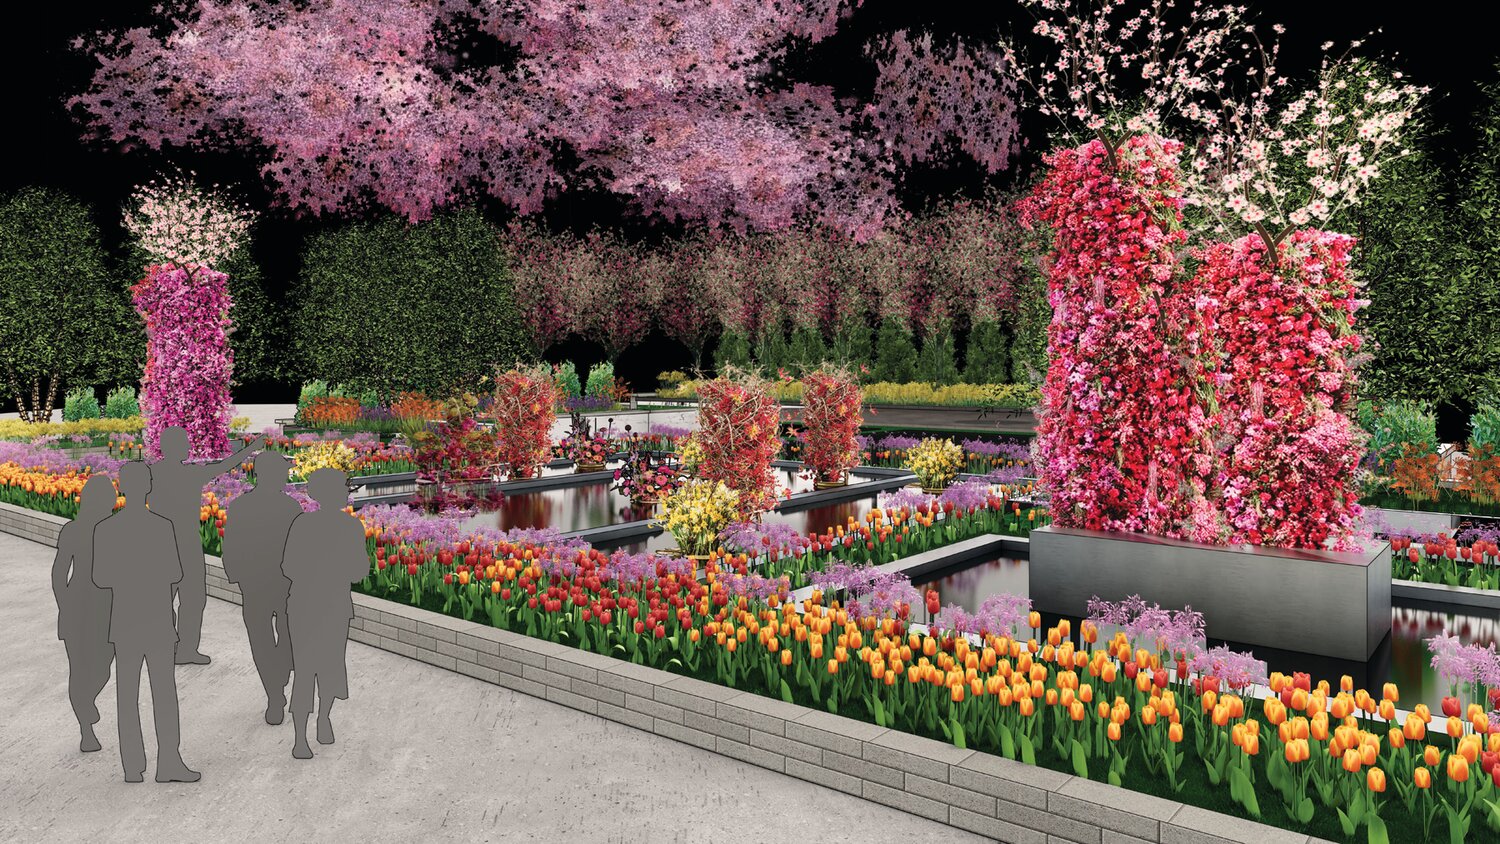 The PHS Entrance Garden at the Philadelphia Flower Show will feature an innovative use of water as an artistic medium, boasting the show’s largest-ever created body of water, shown here in an artistic rendering.